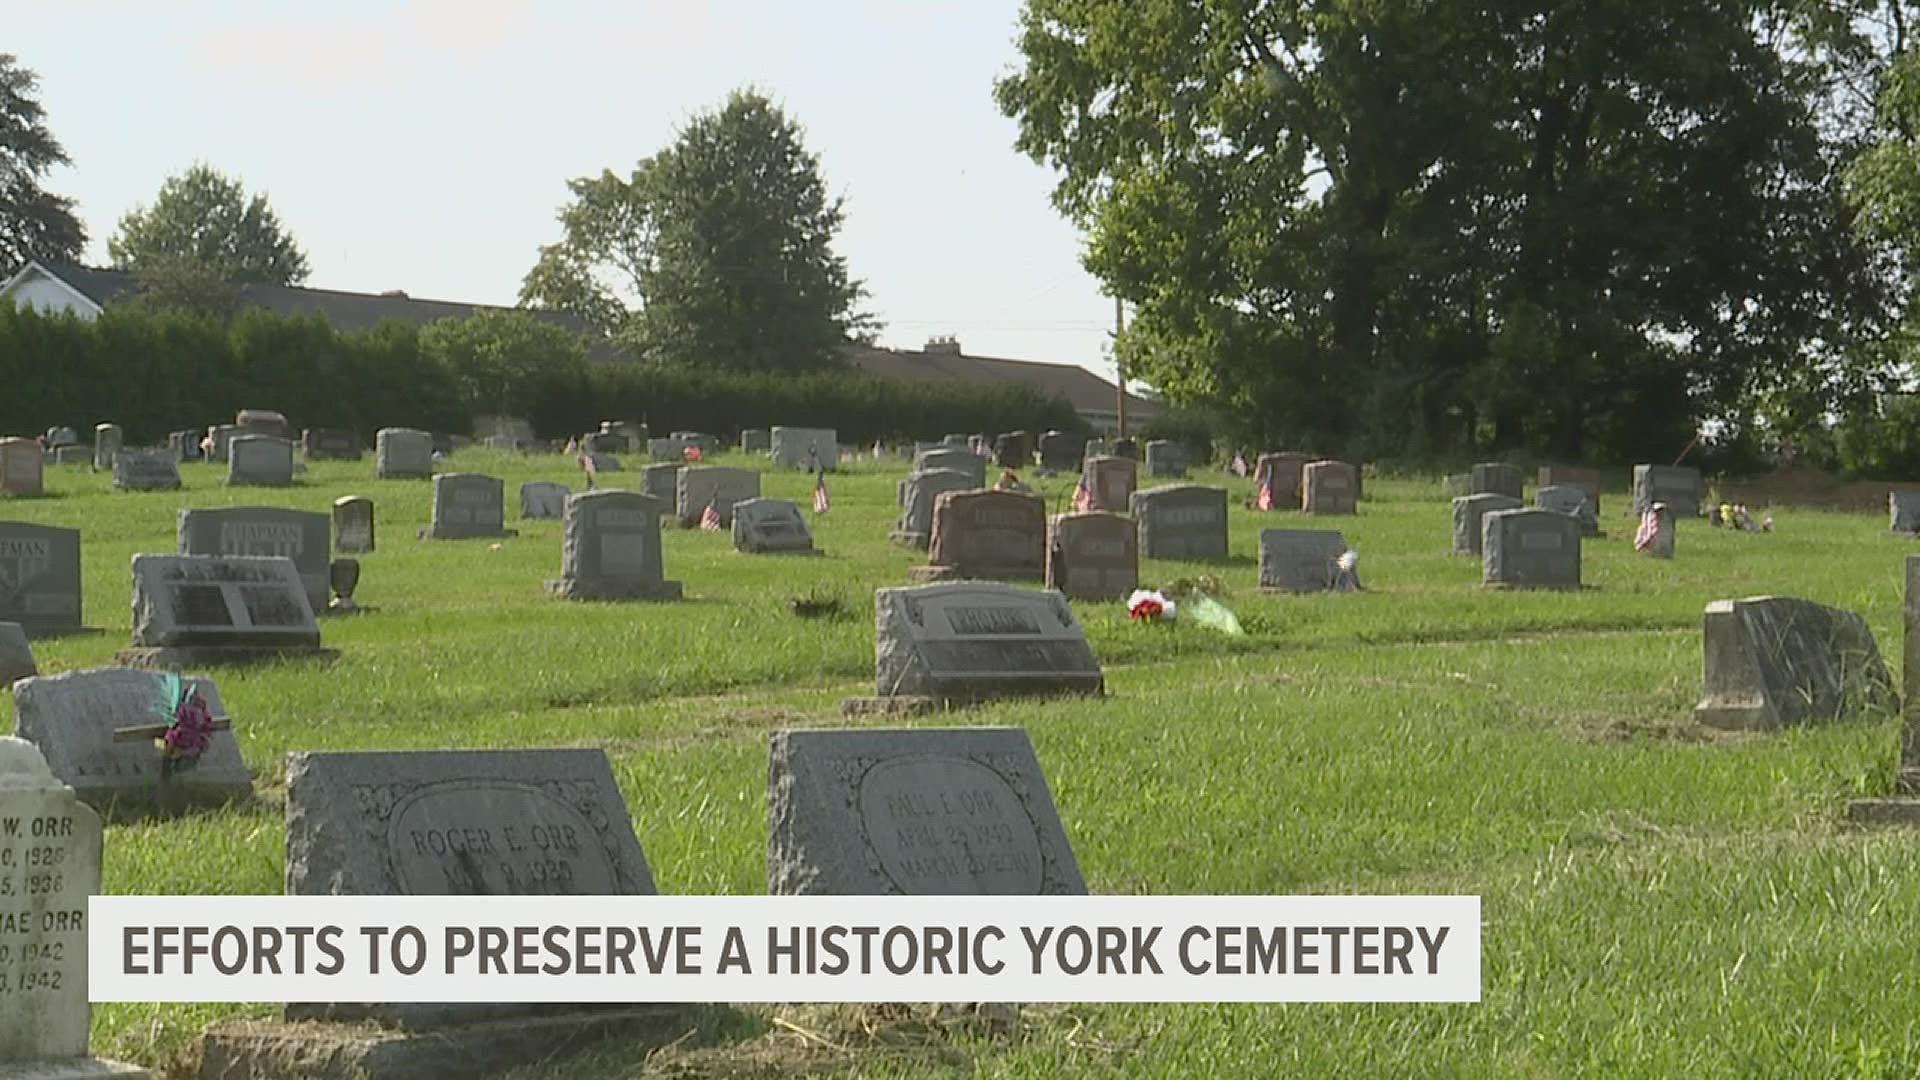 Board members of the Lebanon Cemetery in York hope to engage with the community maintain the burial site